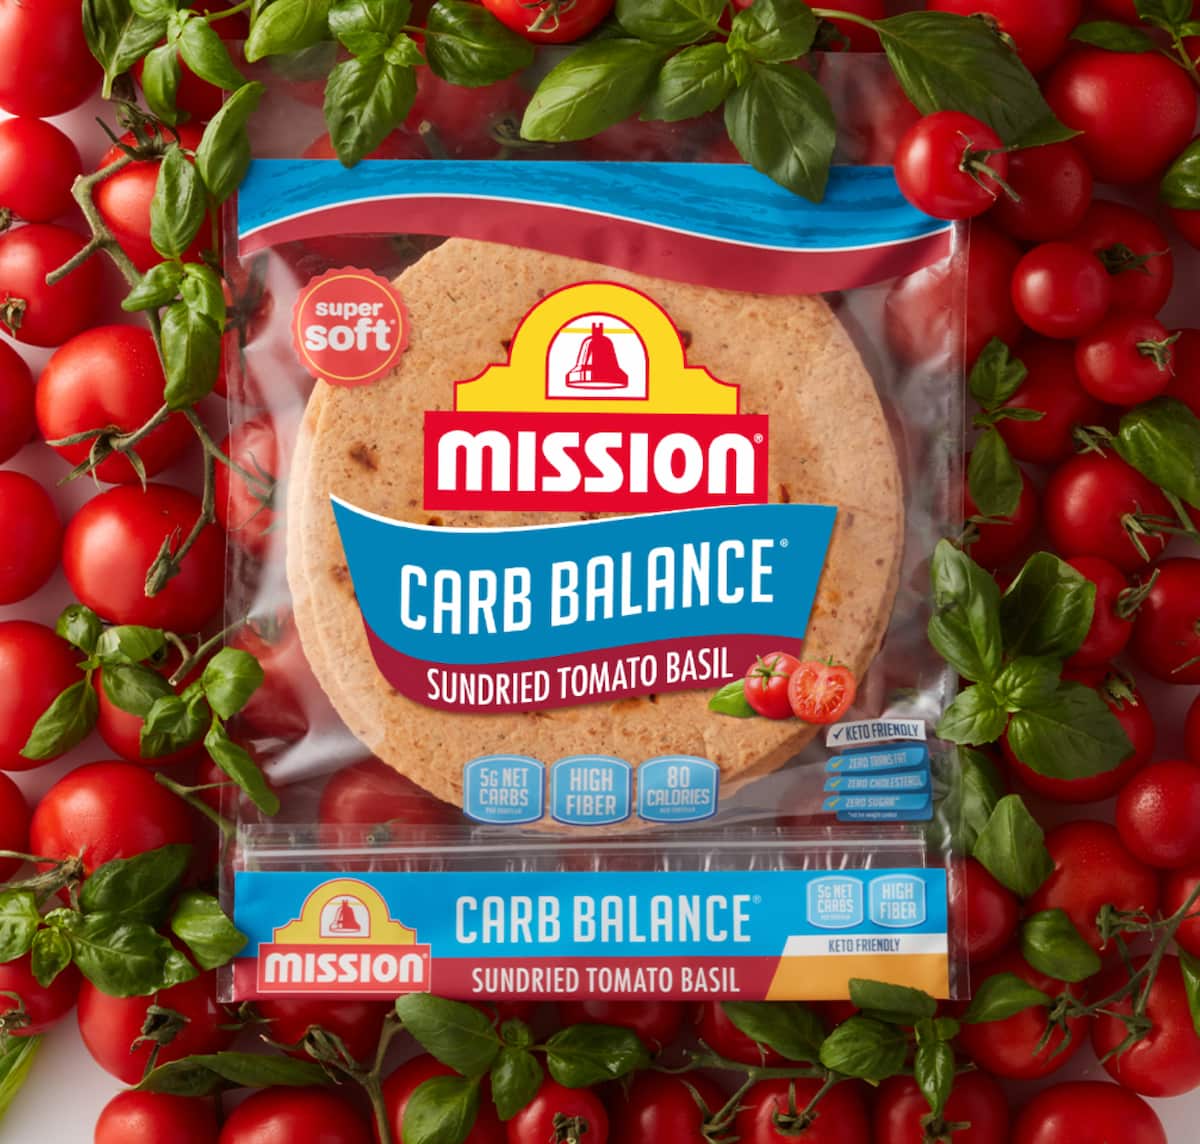 A package of Mission carb balance sun dried tortillas.